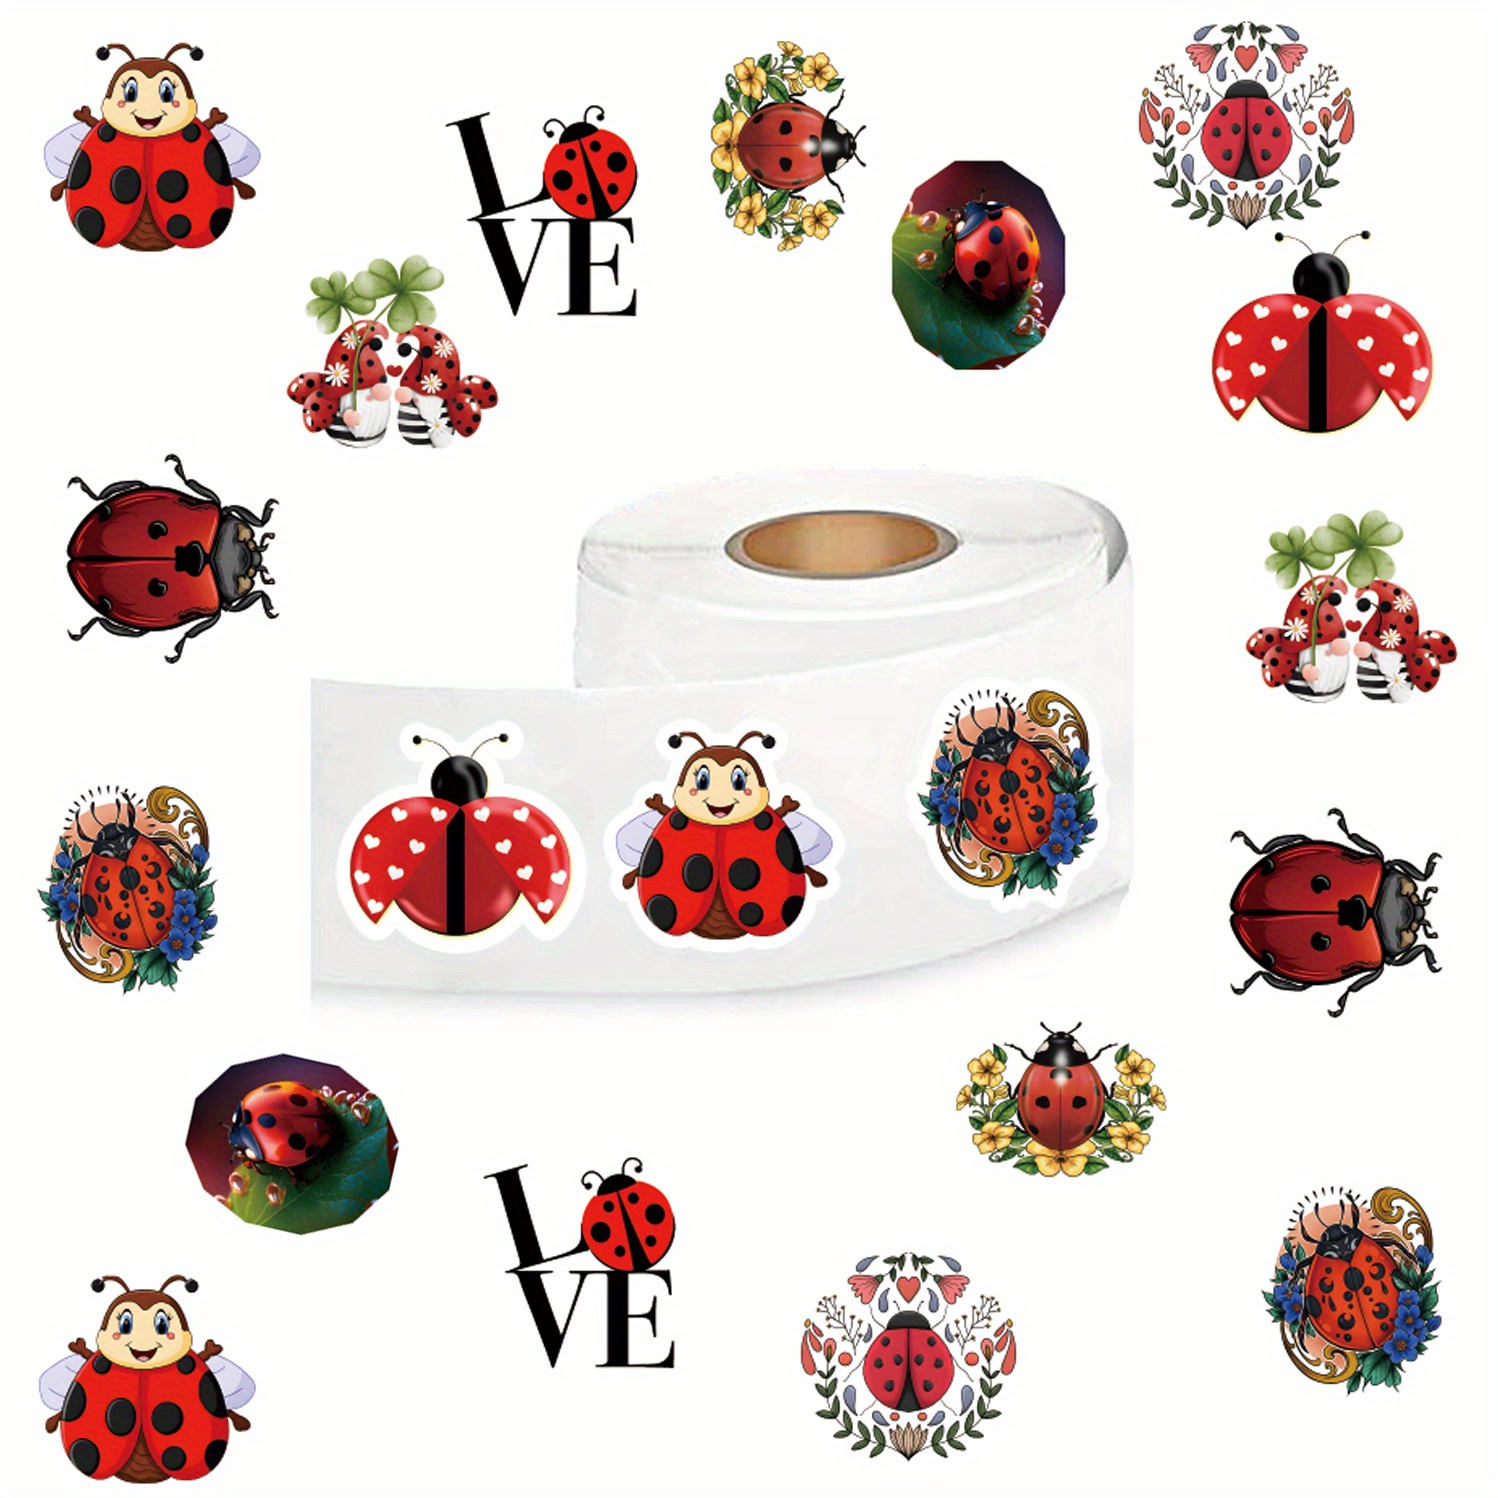 

500pcs Cartoon Cute Ladybug Stickers For Stationery, Books, Laptops, Water Cups, Mobile Cases, ,guitars